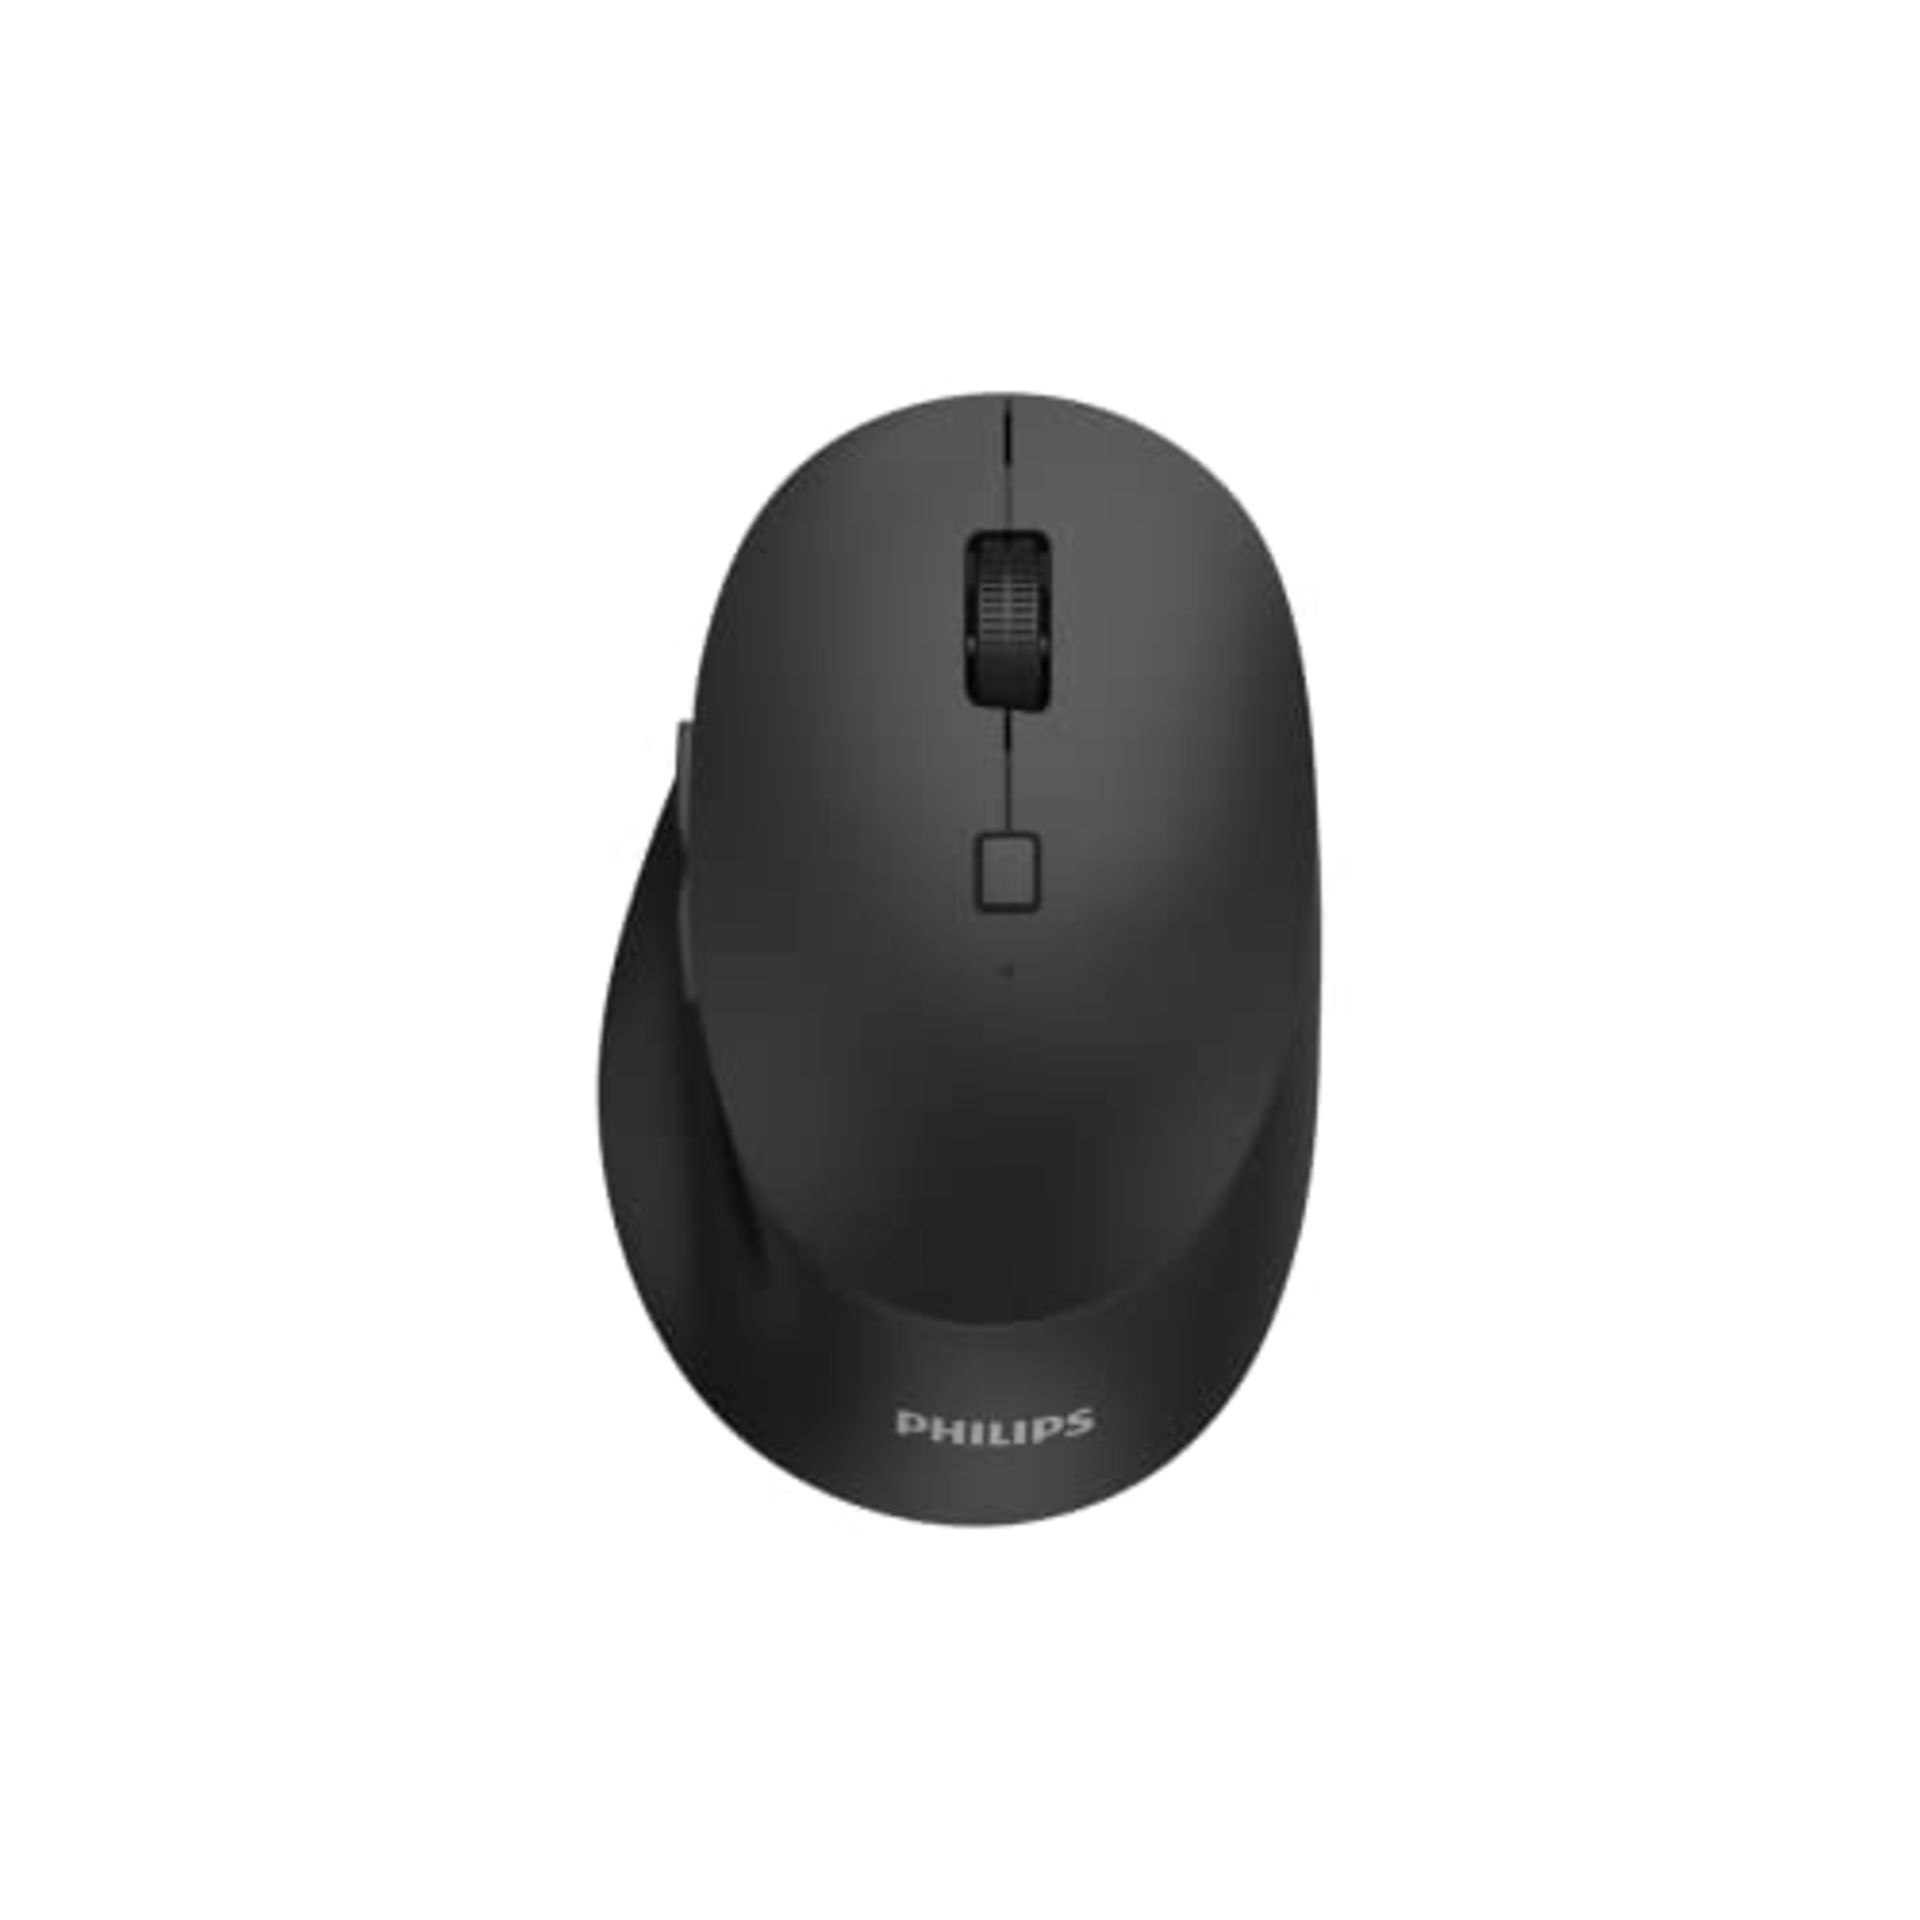 Philips SPK7607 Wireless Mouse - up to 3200 dpi, 2.4 GHz + Bluetooth 3.0/5.0, Silent C